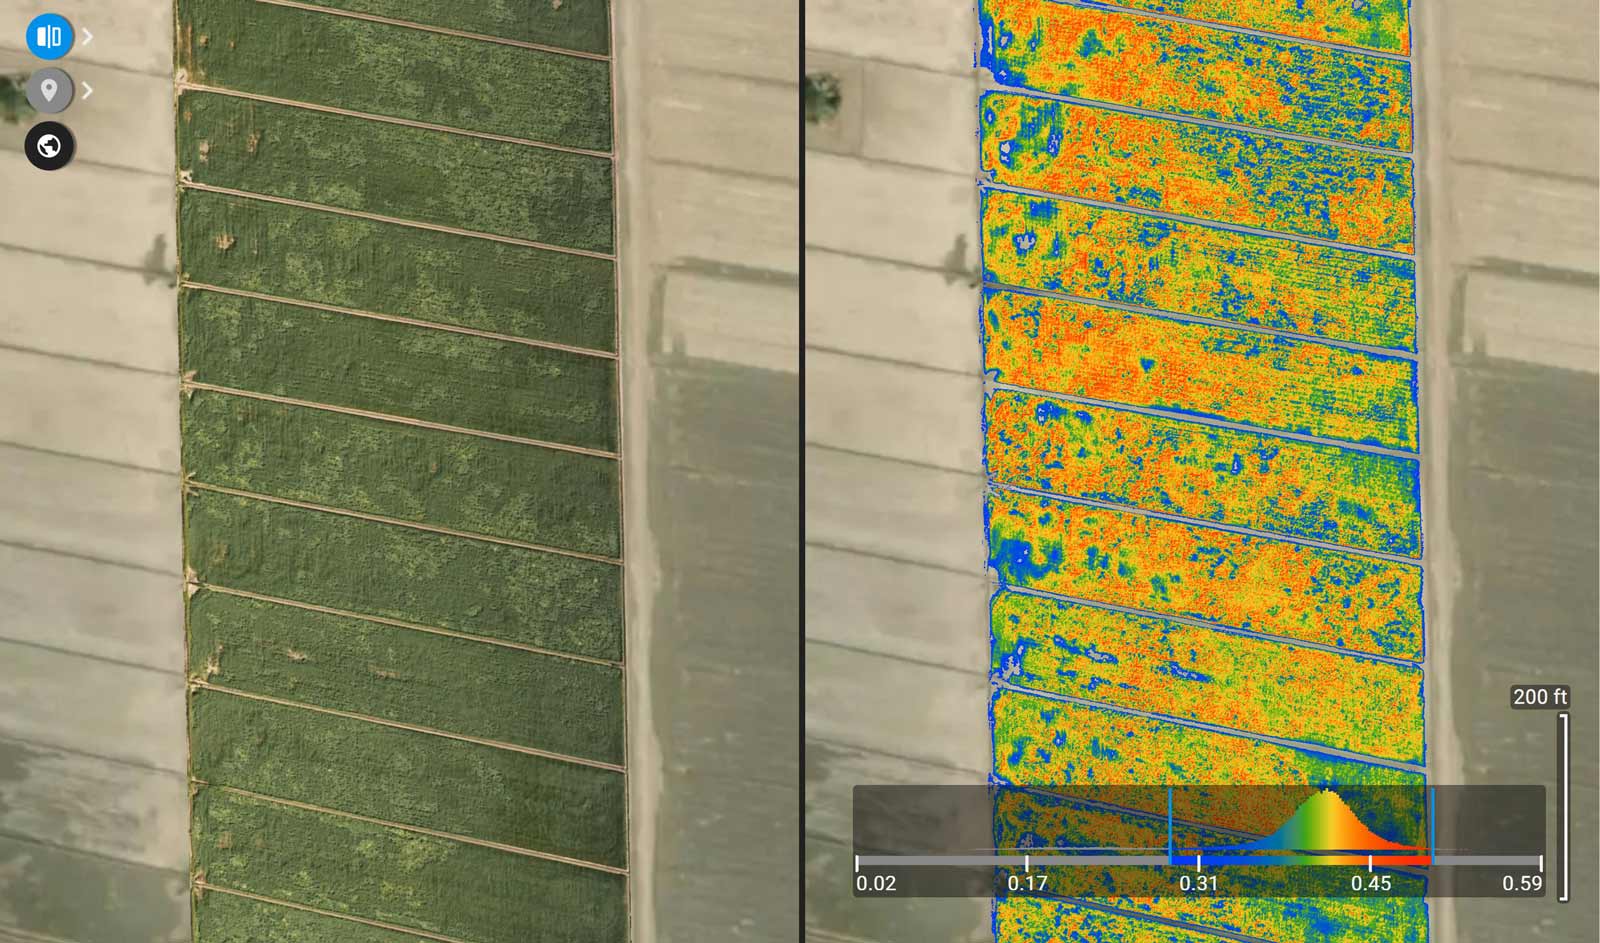 Comparison of the orthomosaic and NDRE vegetation index maps in Pix4Dfields